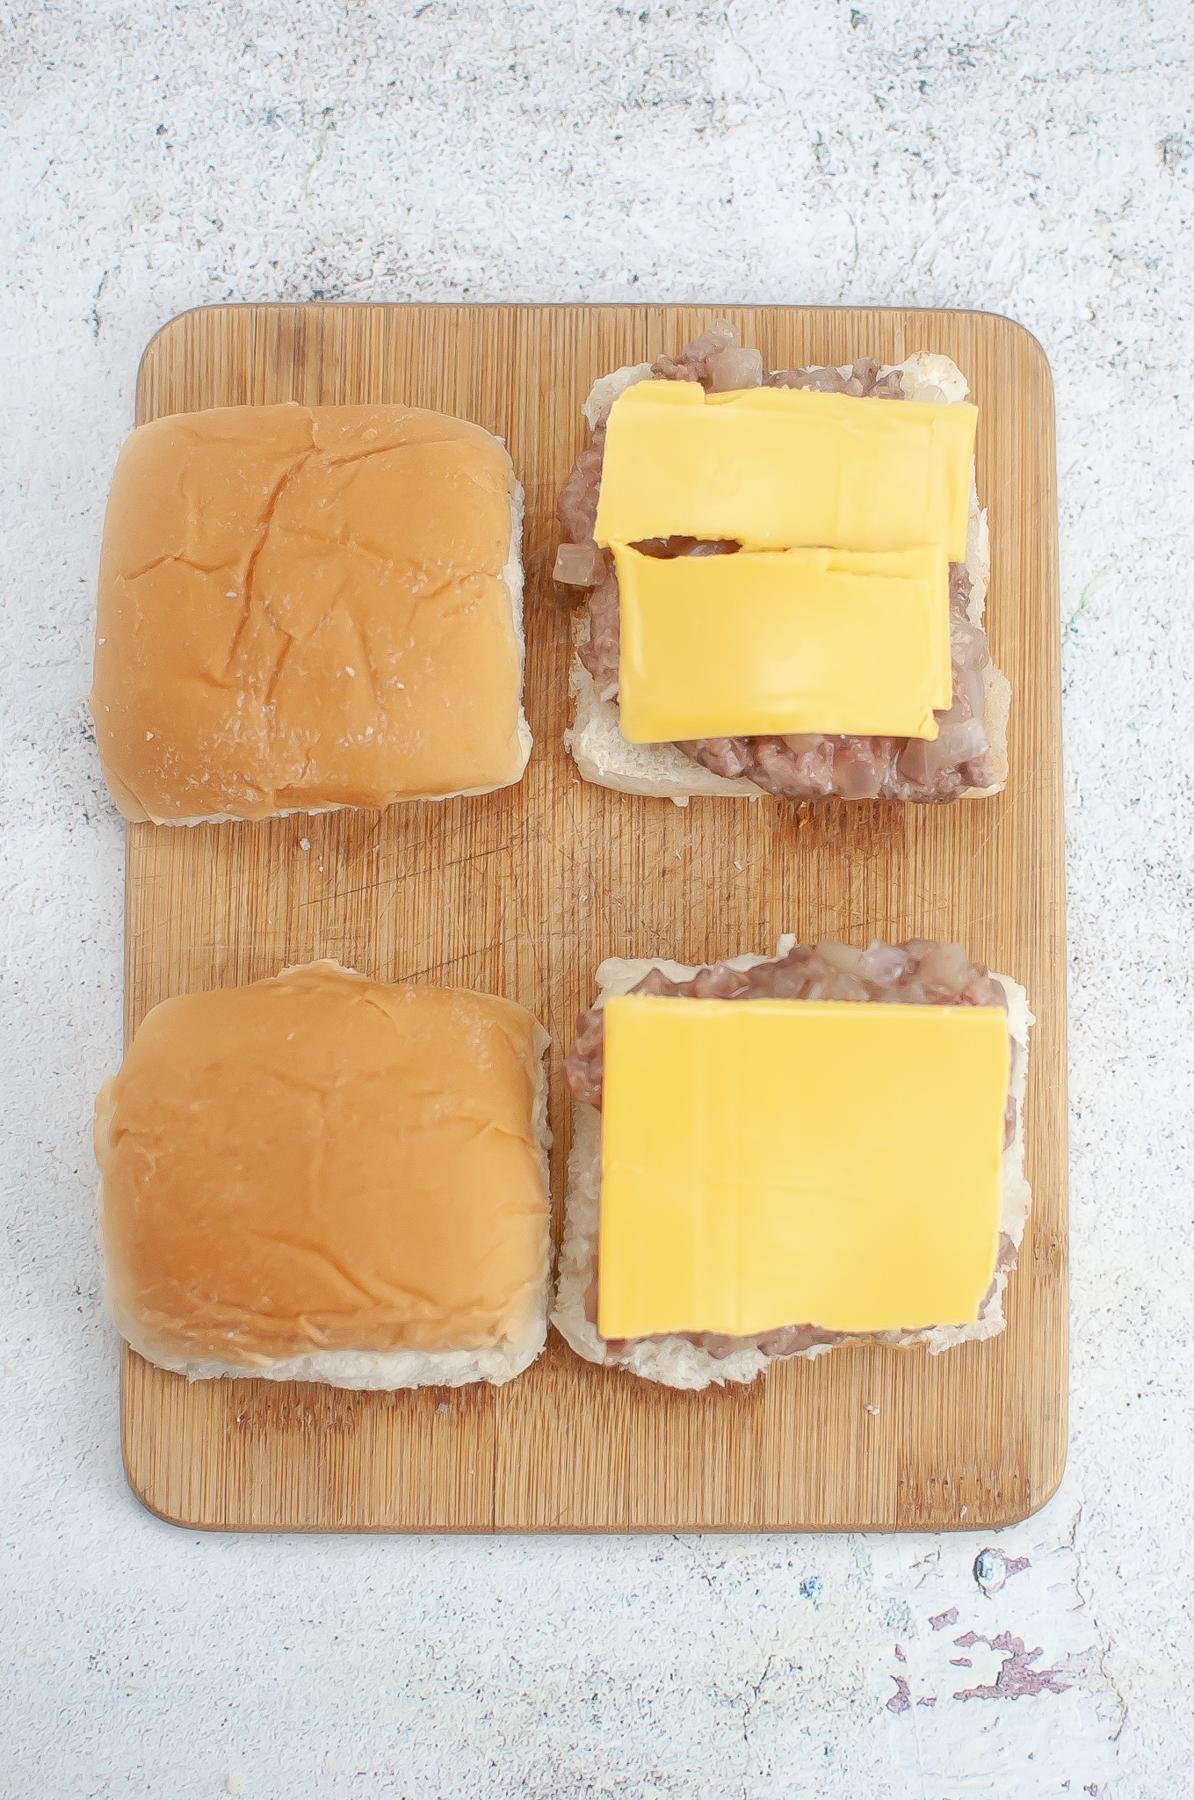 American cheese on the meat patties.